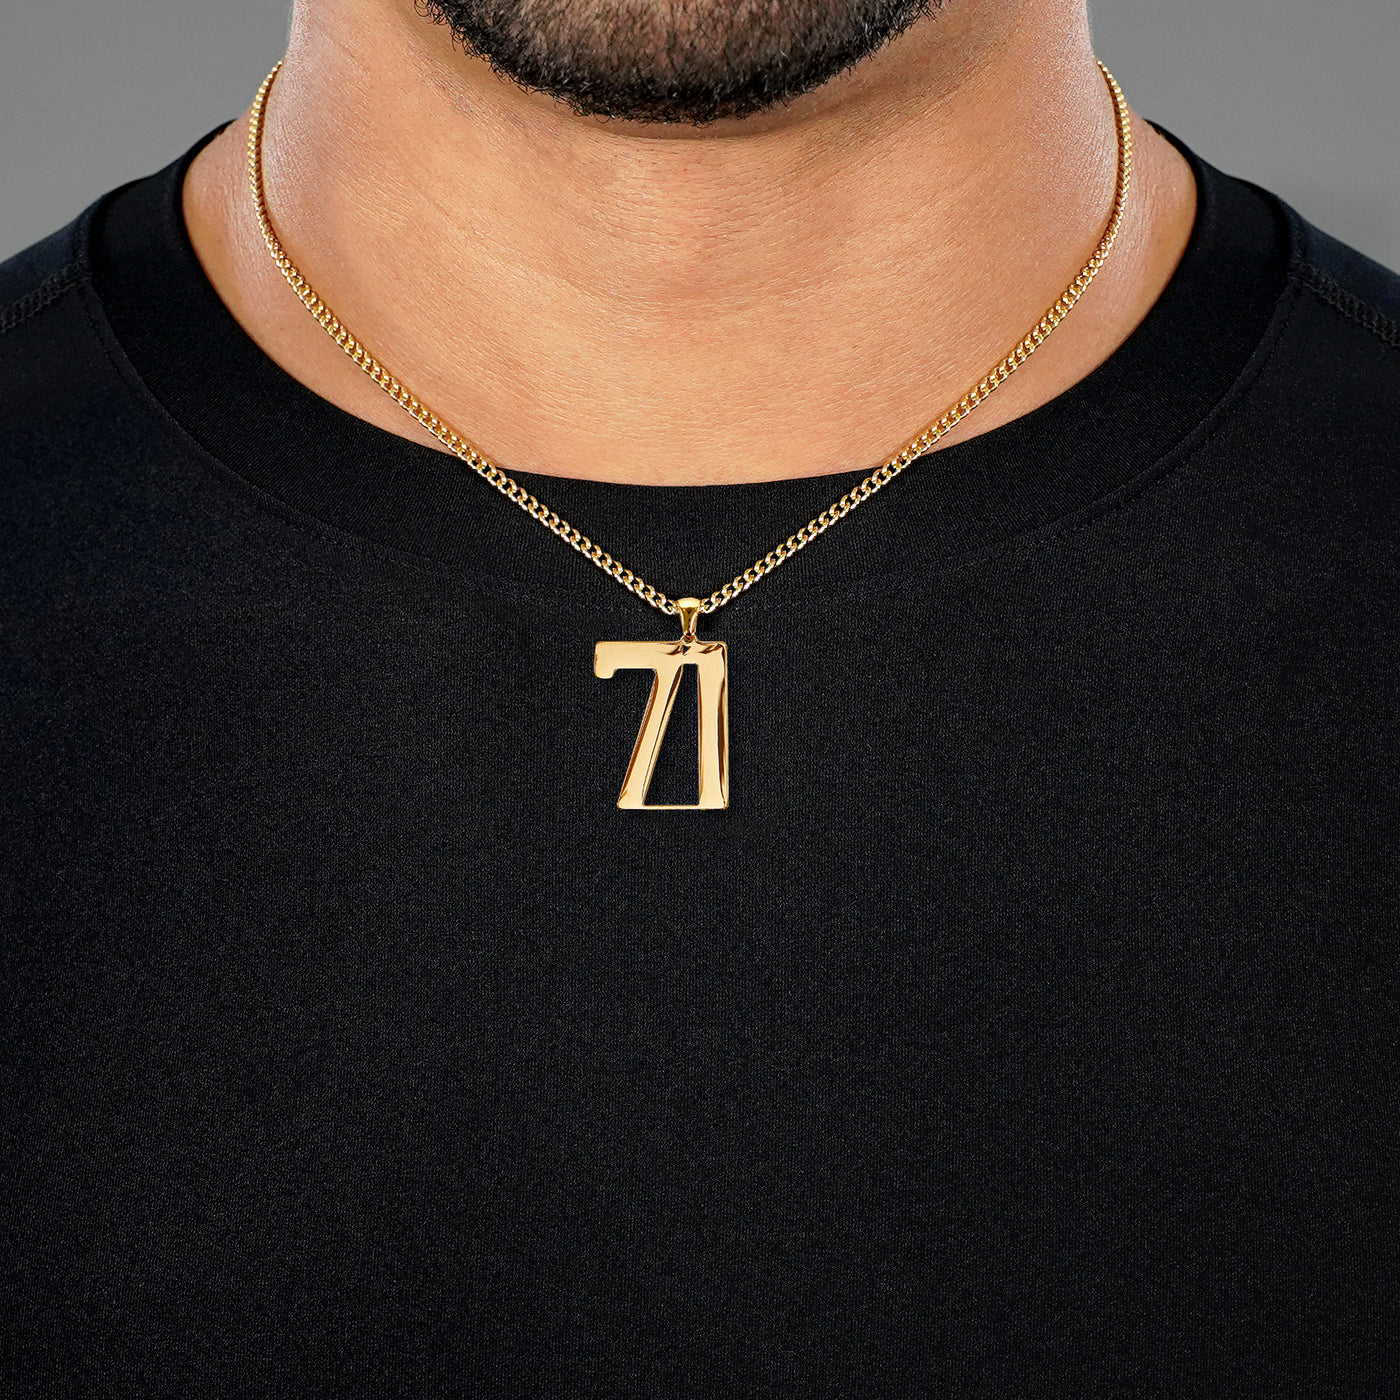 71 Number Pendant with Chain Necklace - Gold Plated Stainless Steel